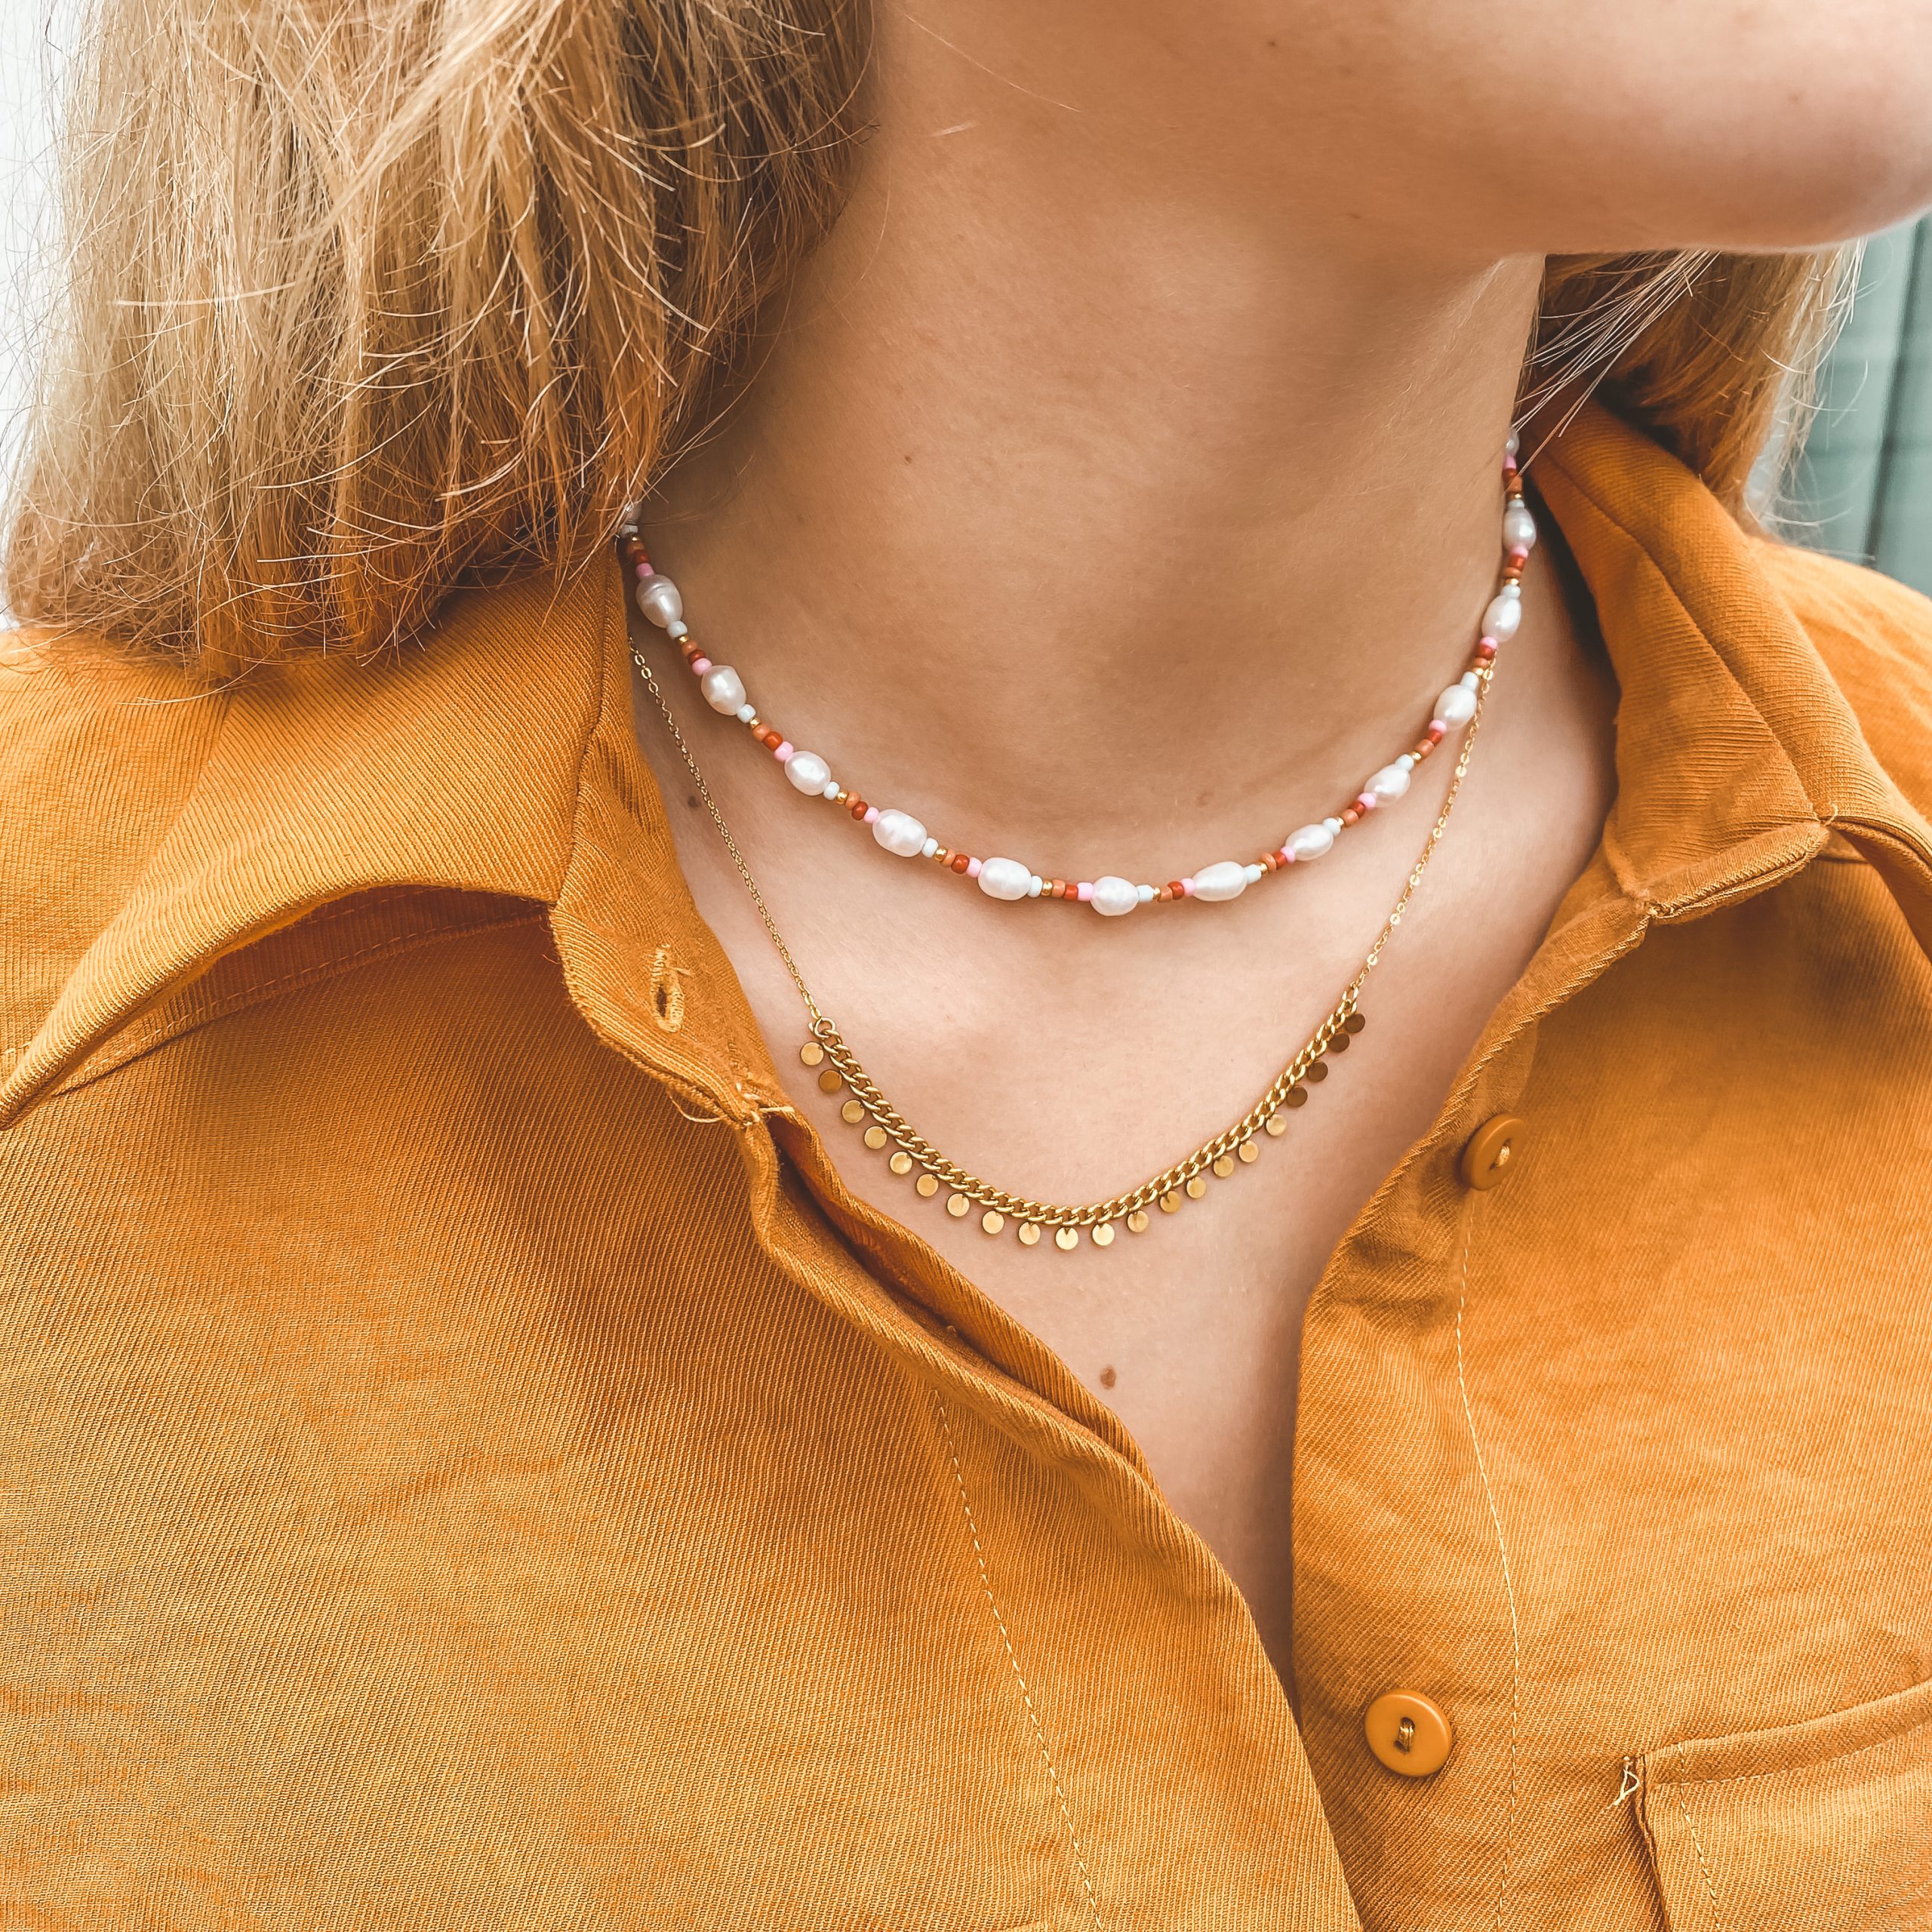 Autumn necklace pearls